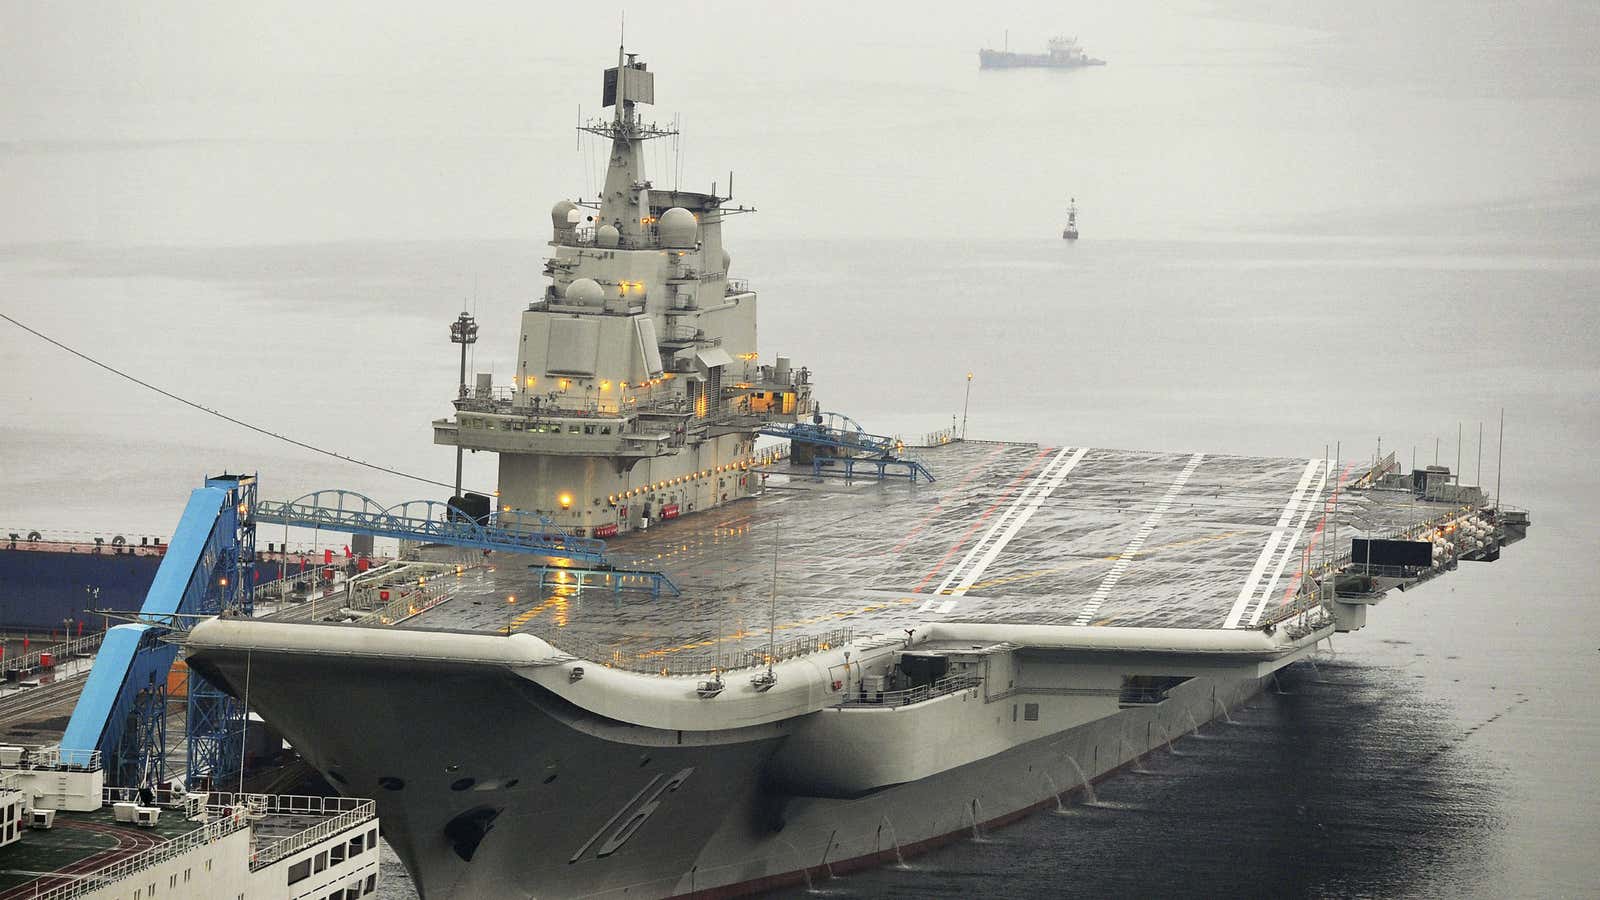 The Liaoning, China’s first aircraft carrier.